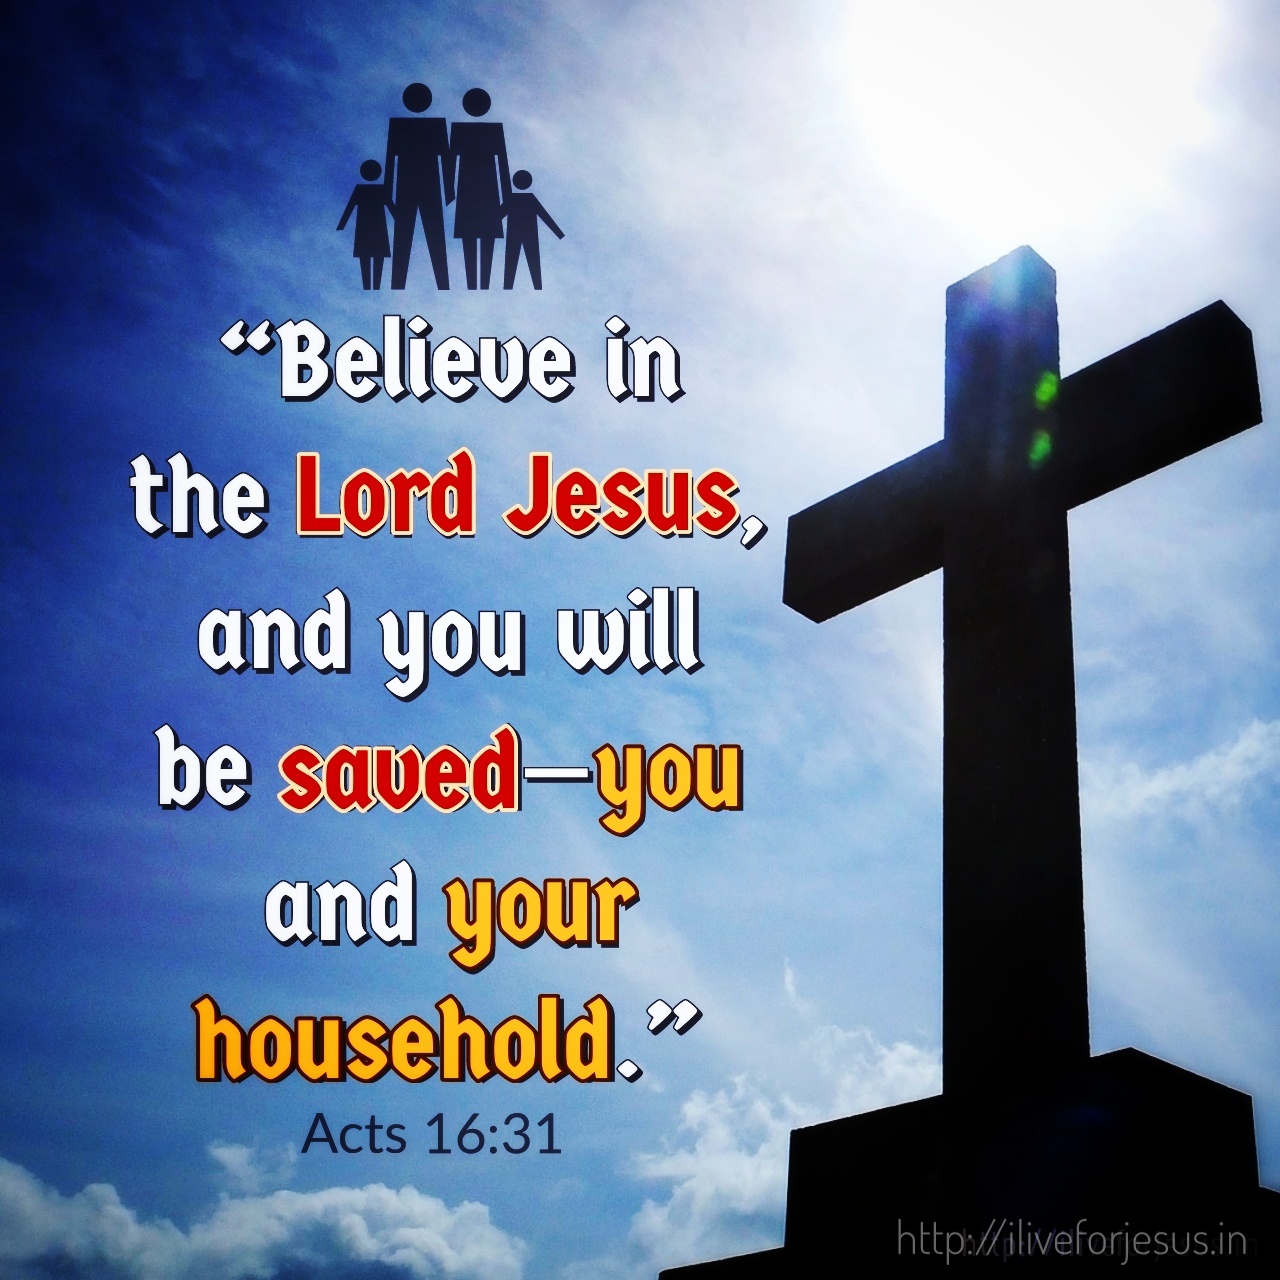 They replied, “Believe in the Lord Jesus, and you will be saved—you and your household." Acts 16:31 NIV